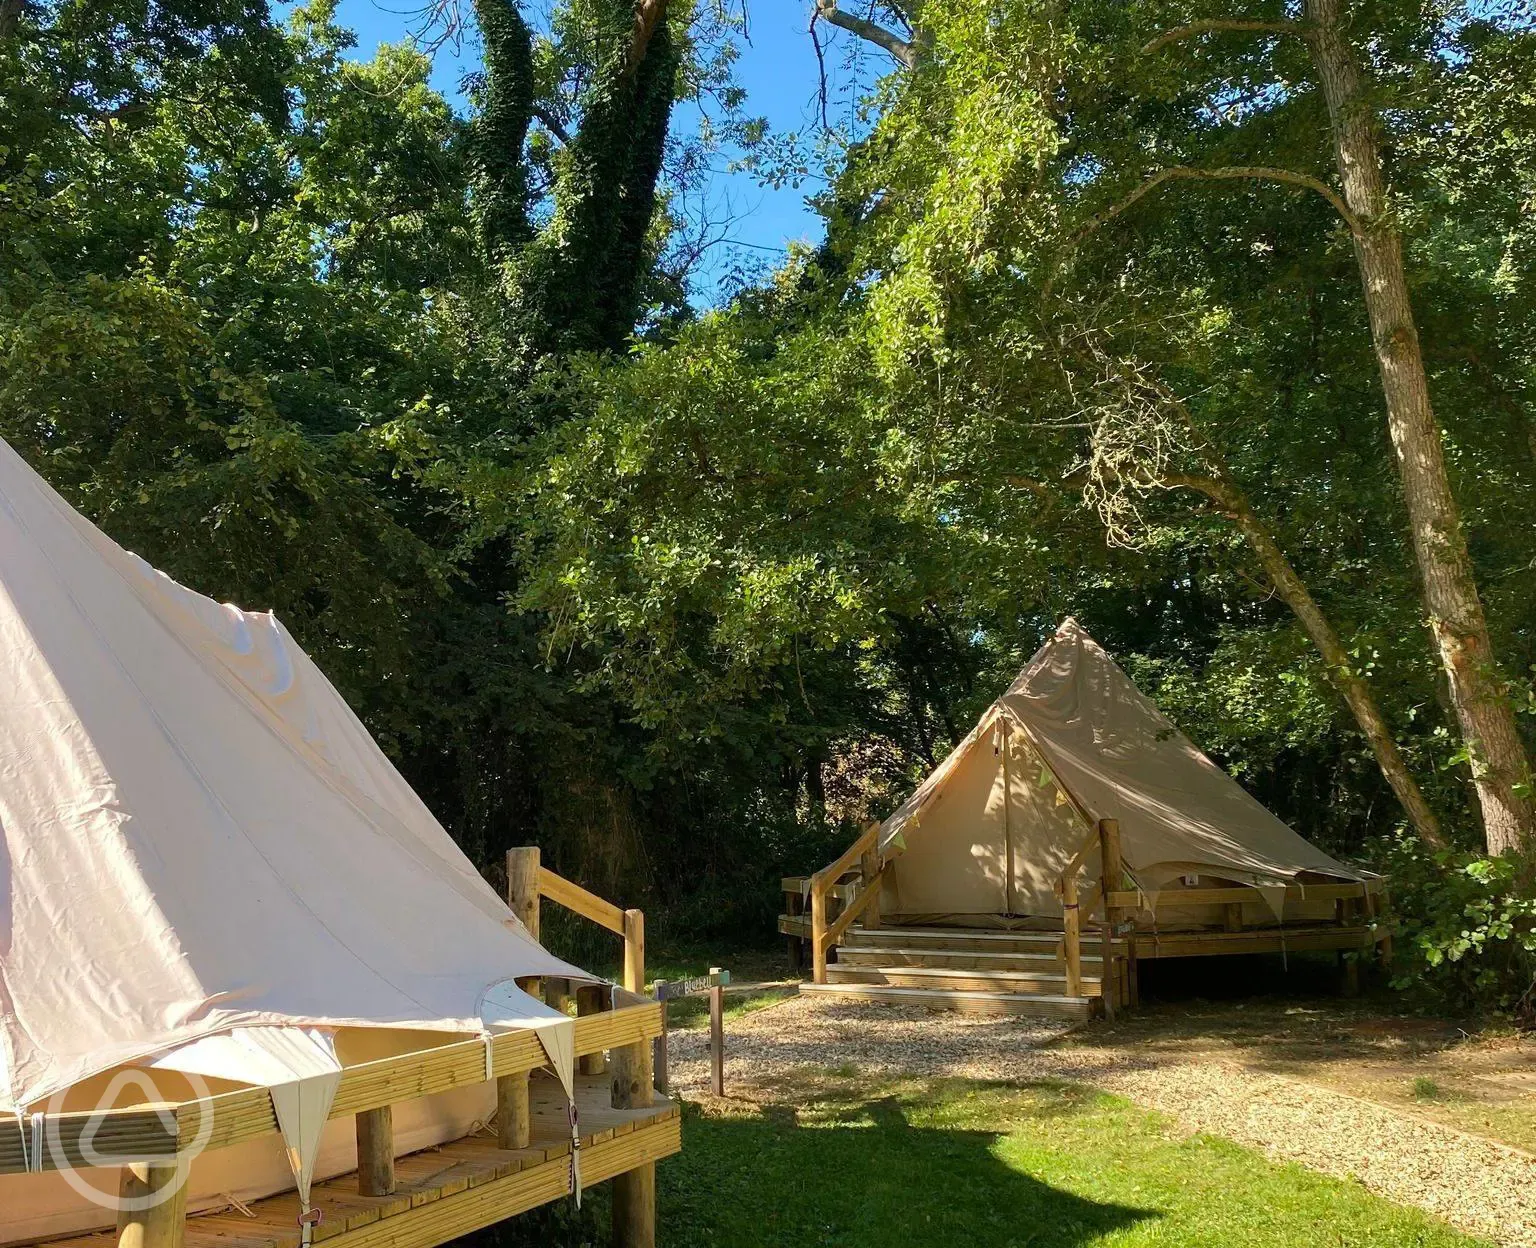 Shaded bell tents